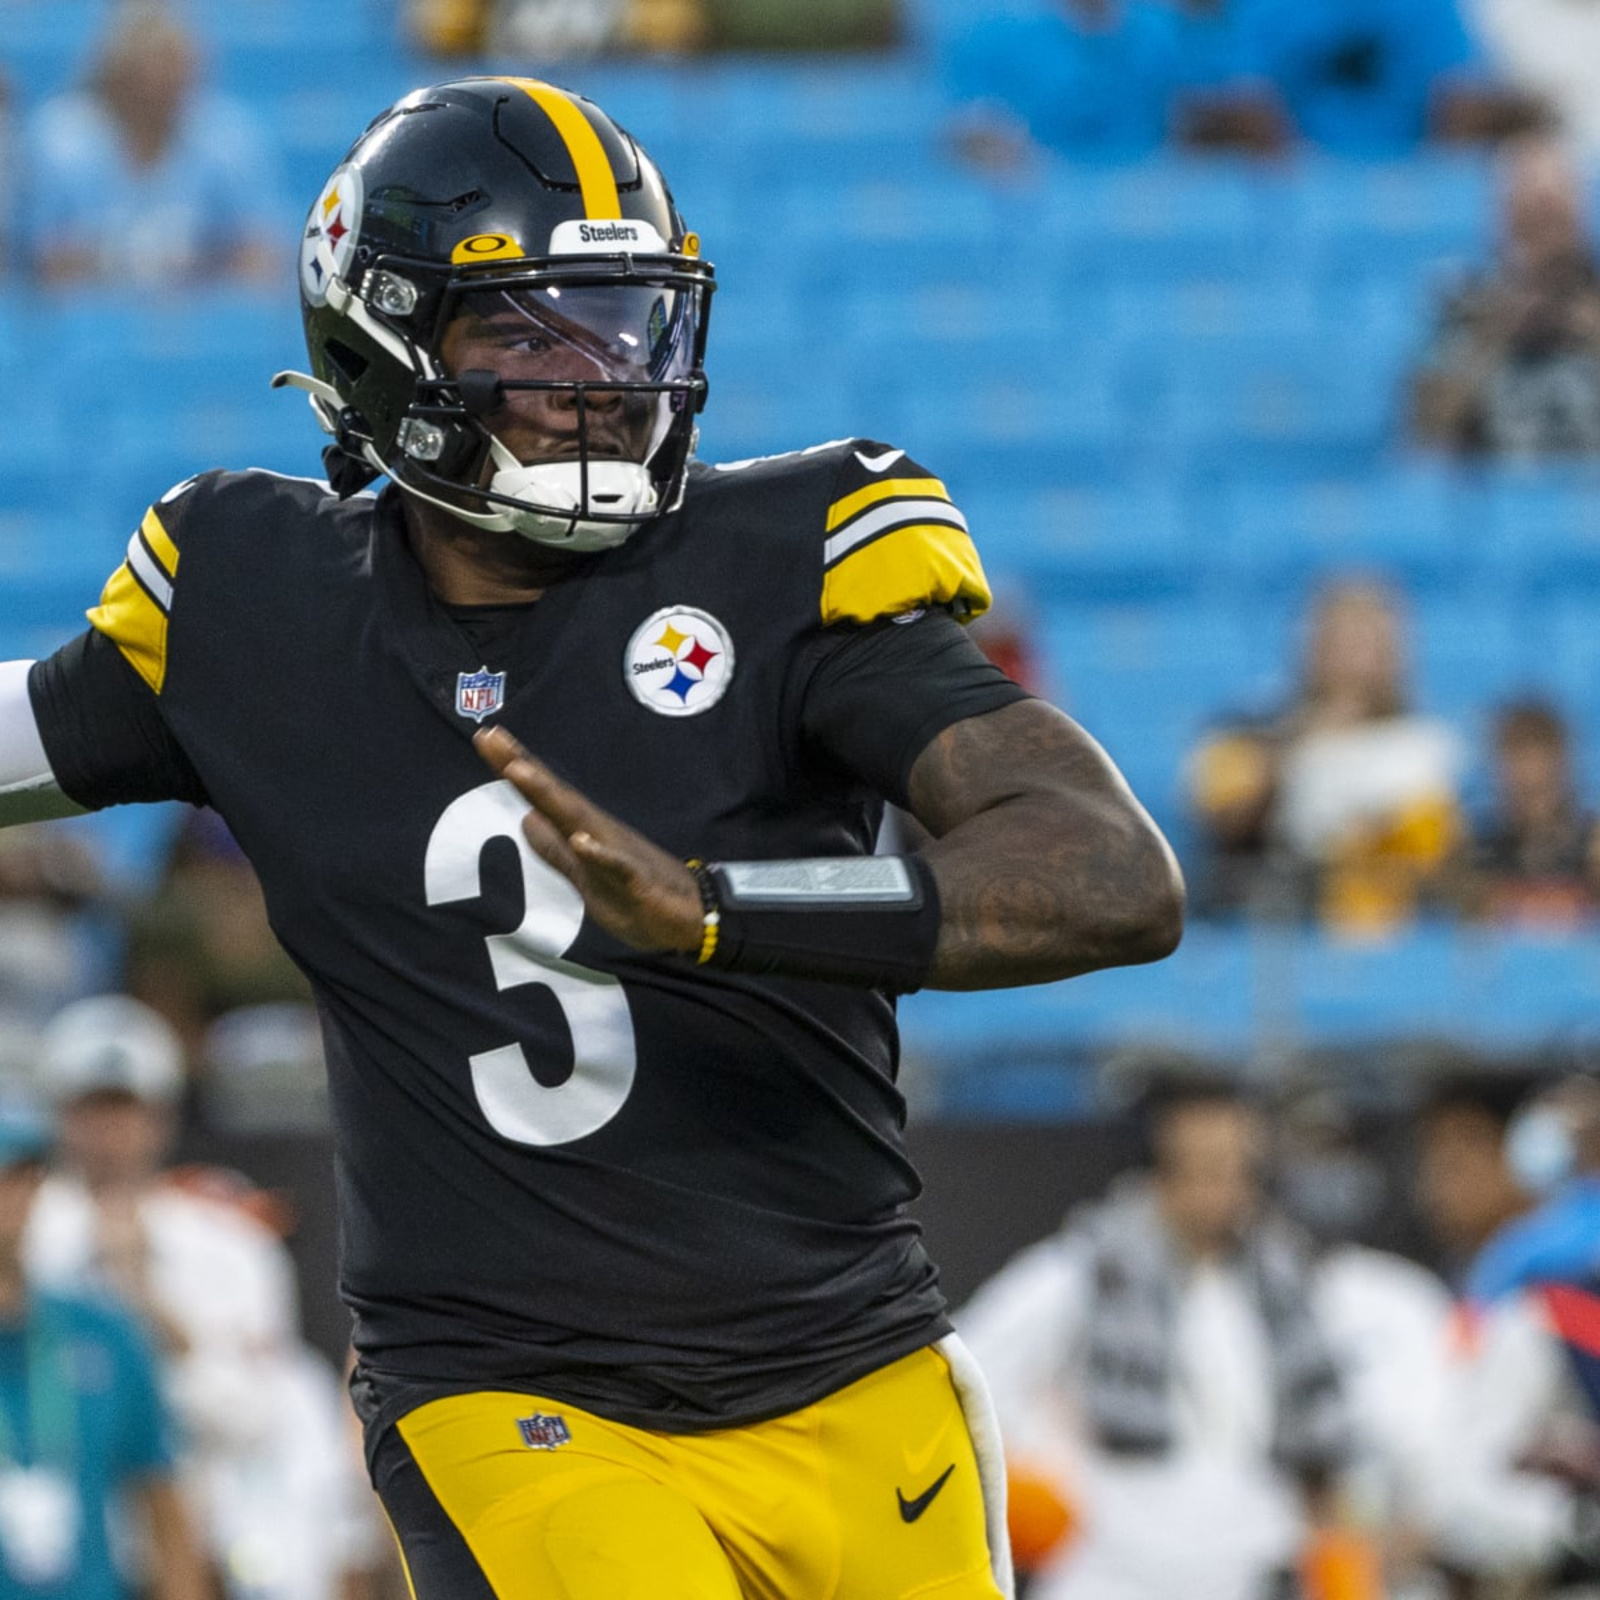 Steelers to Honor Dwayne Haskins with Helmet Decal After QB's